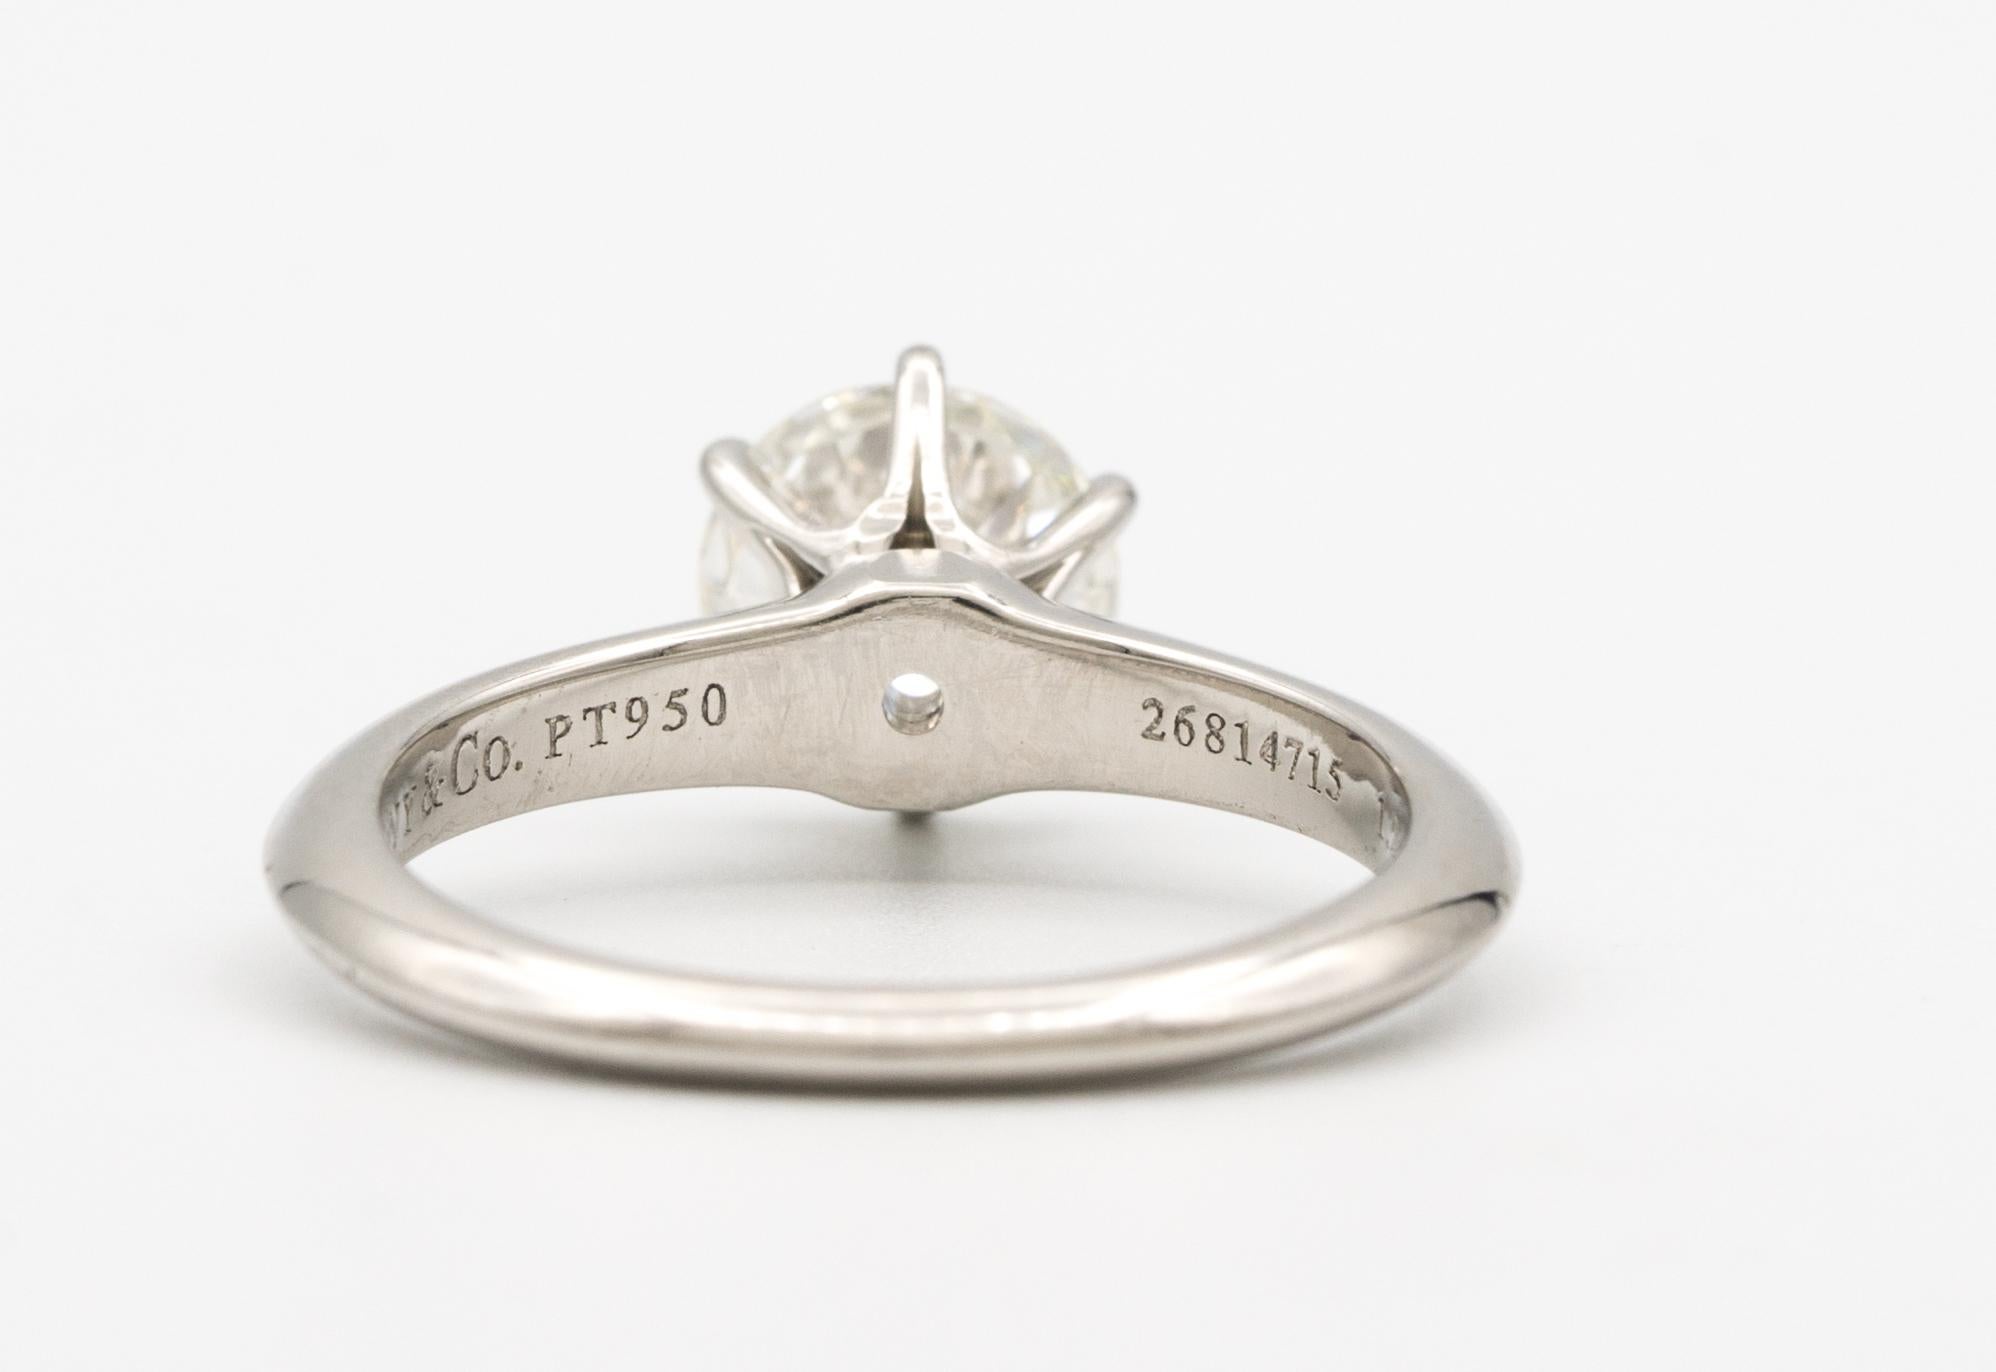 Tiffany & Co. Engagement Ring with 1.28 Carat Centre in Platinum ($18, 200) 1